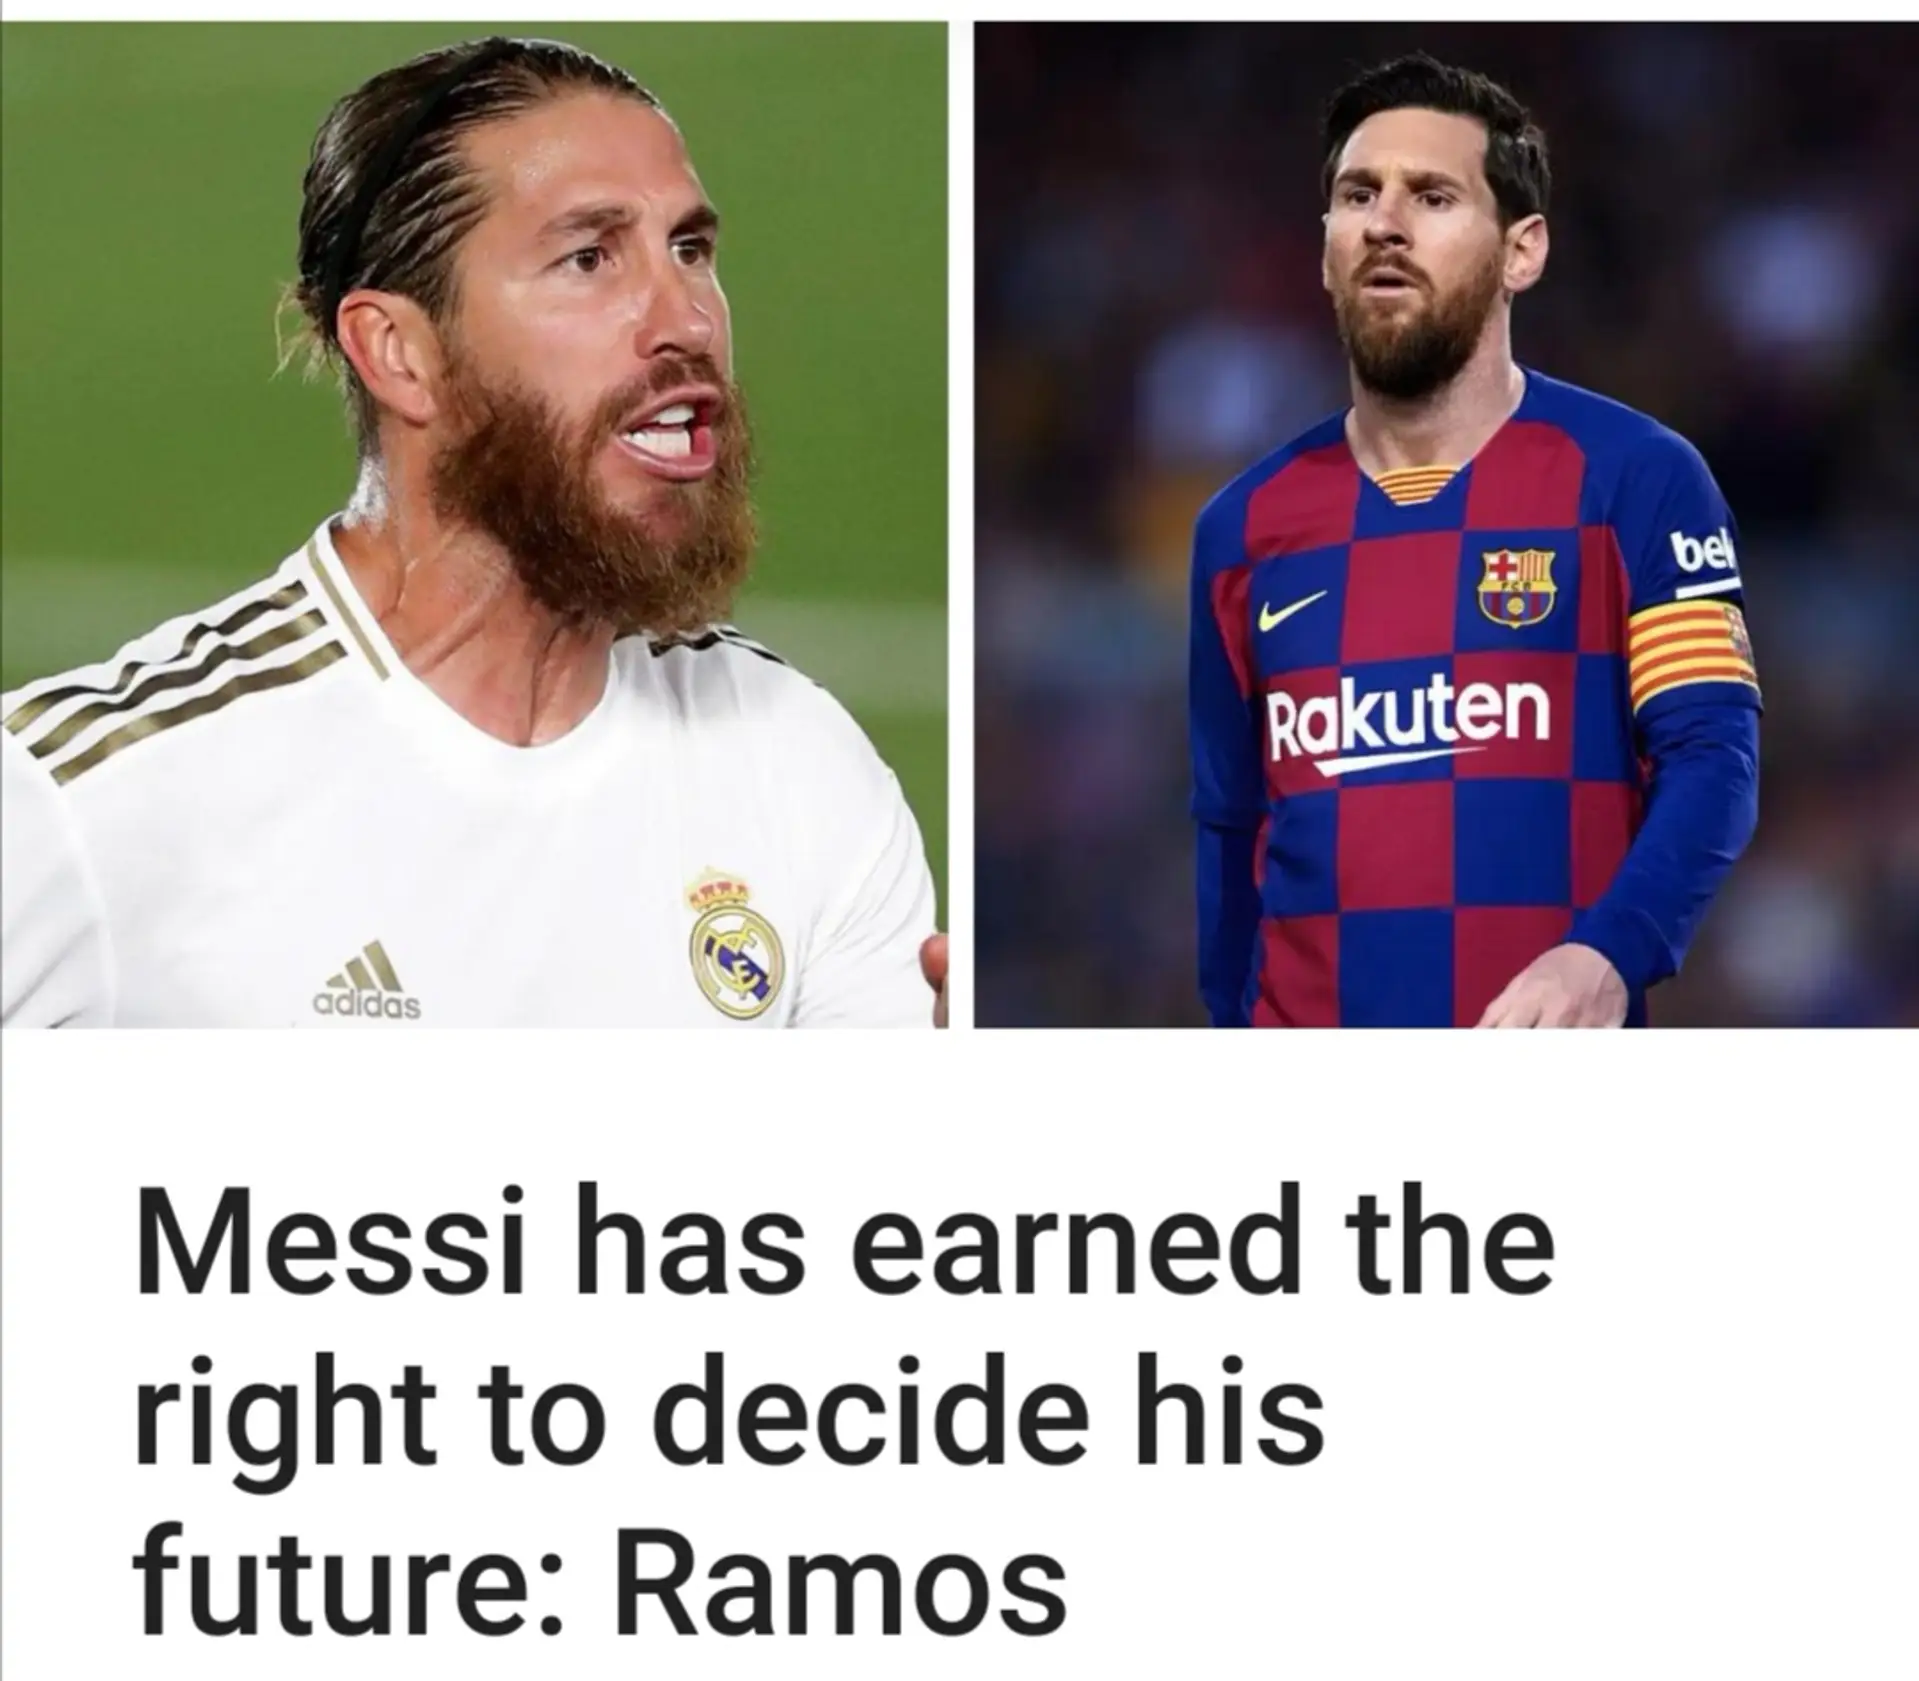 Sergio Ramos voiced his support for Messi's decision.